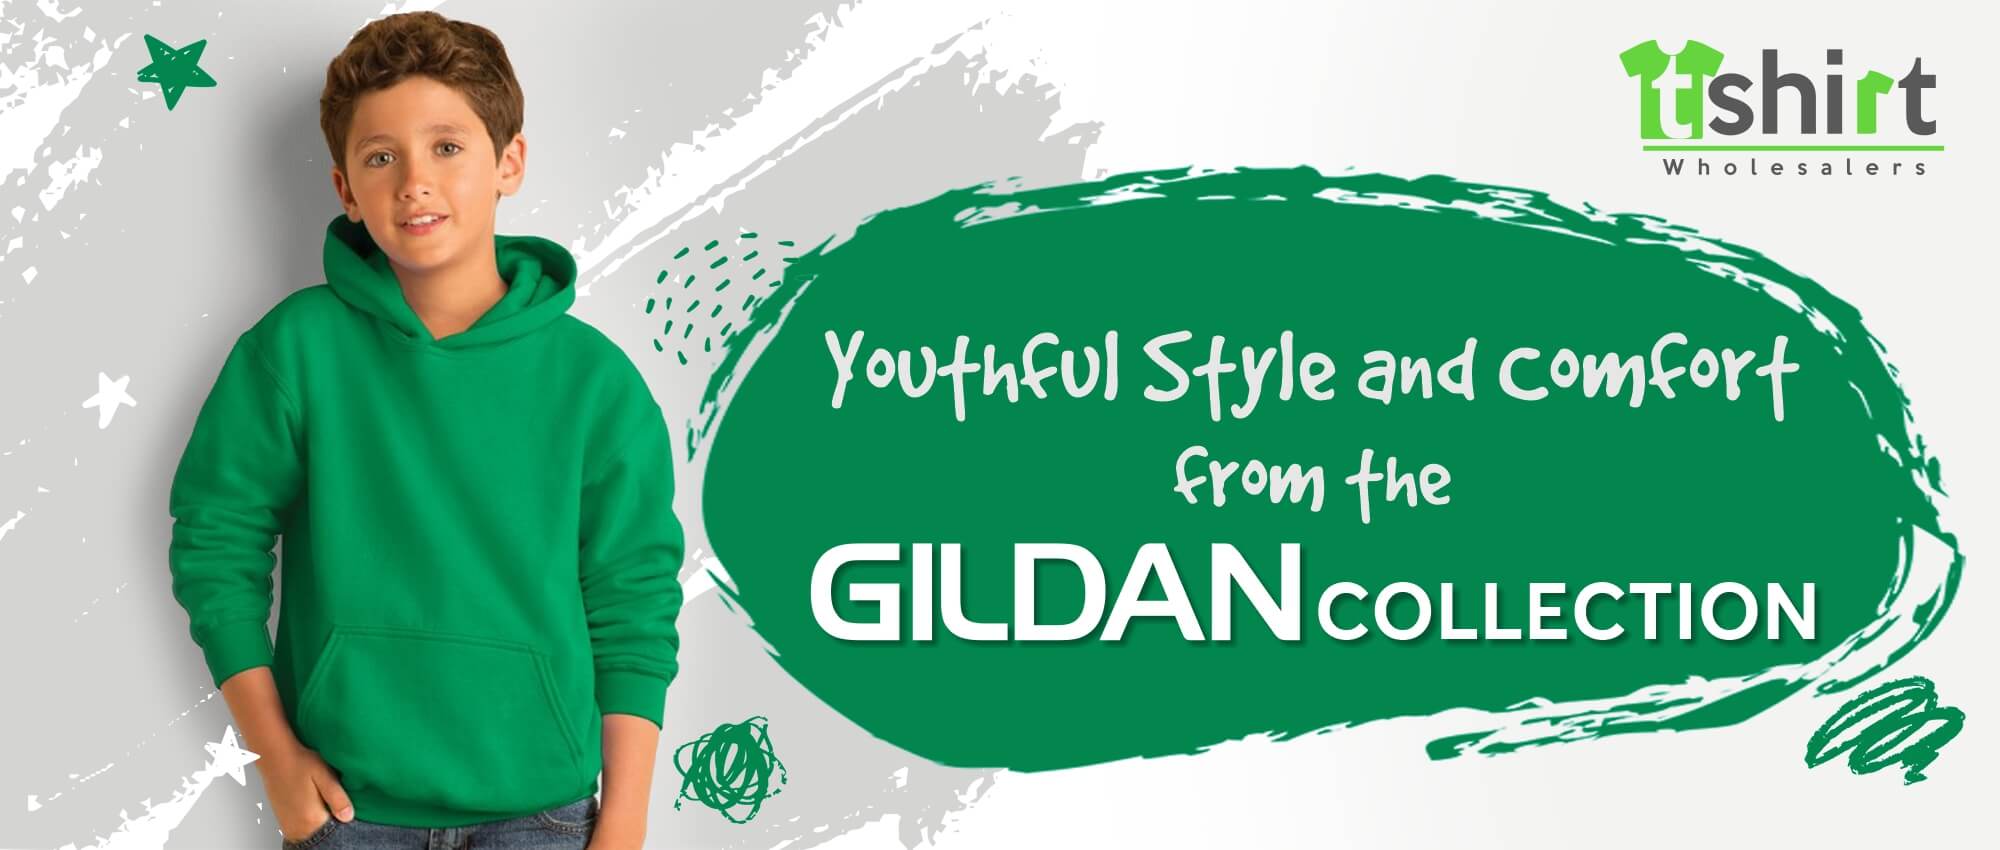 YOUTHFUL STYLE AND COMFORT FROM THE GILDAN COLLECTION